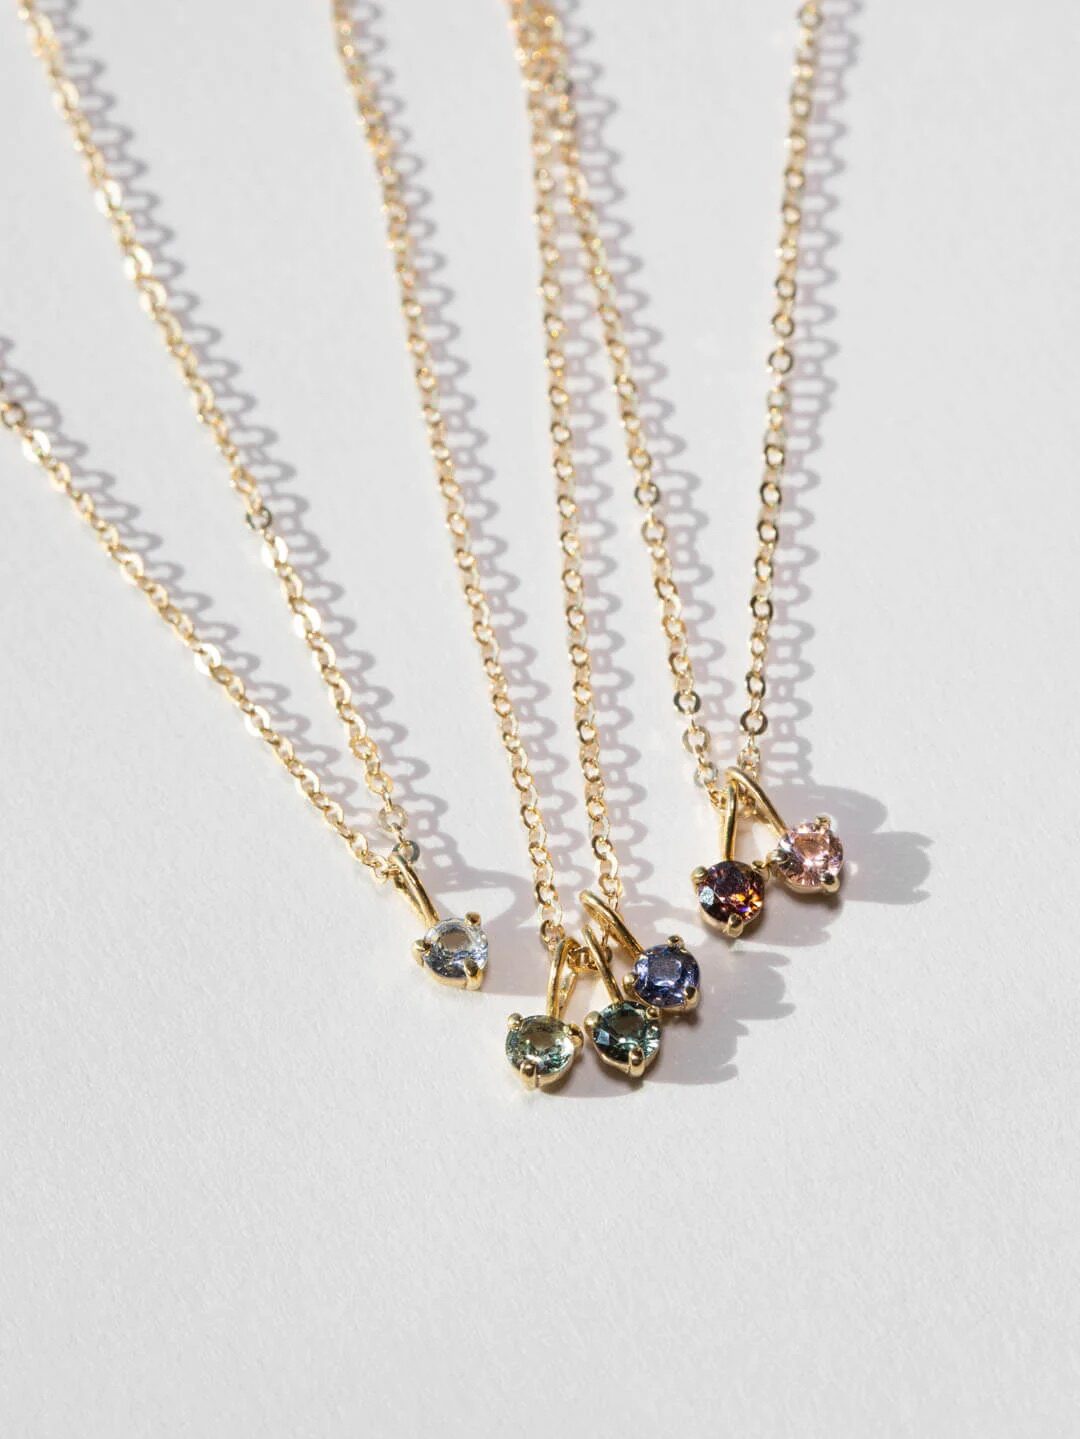 Five delicate gold necklaces with various colored gemstone pendants on a white surface.